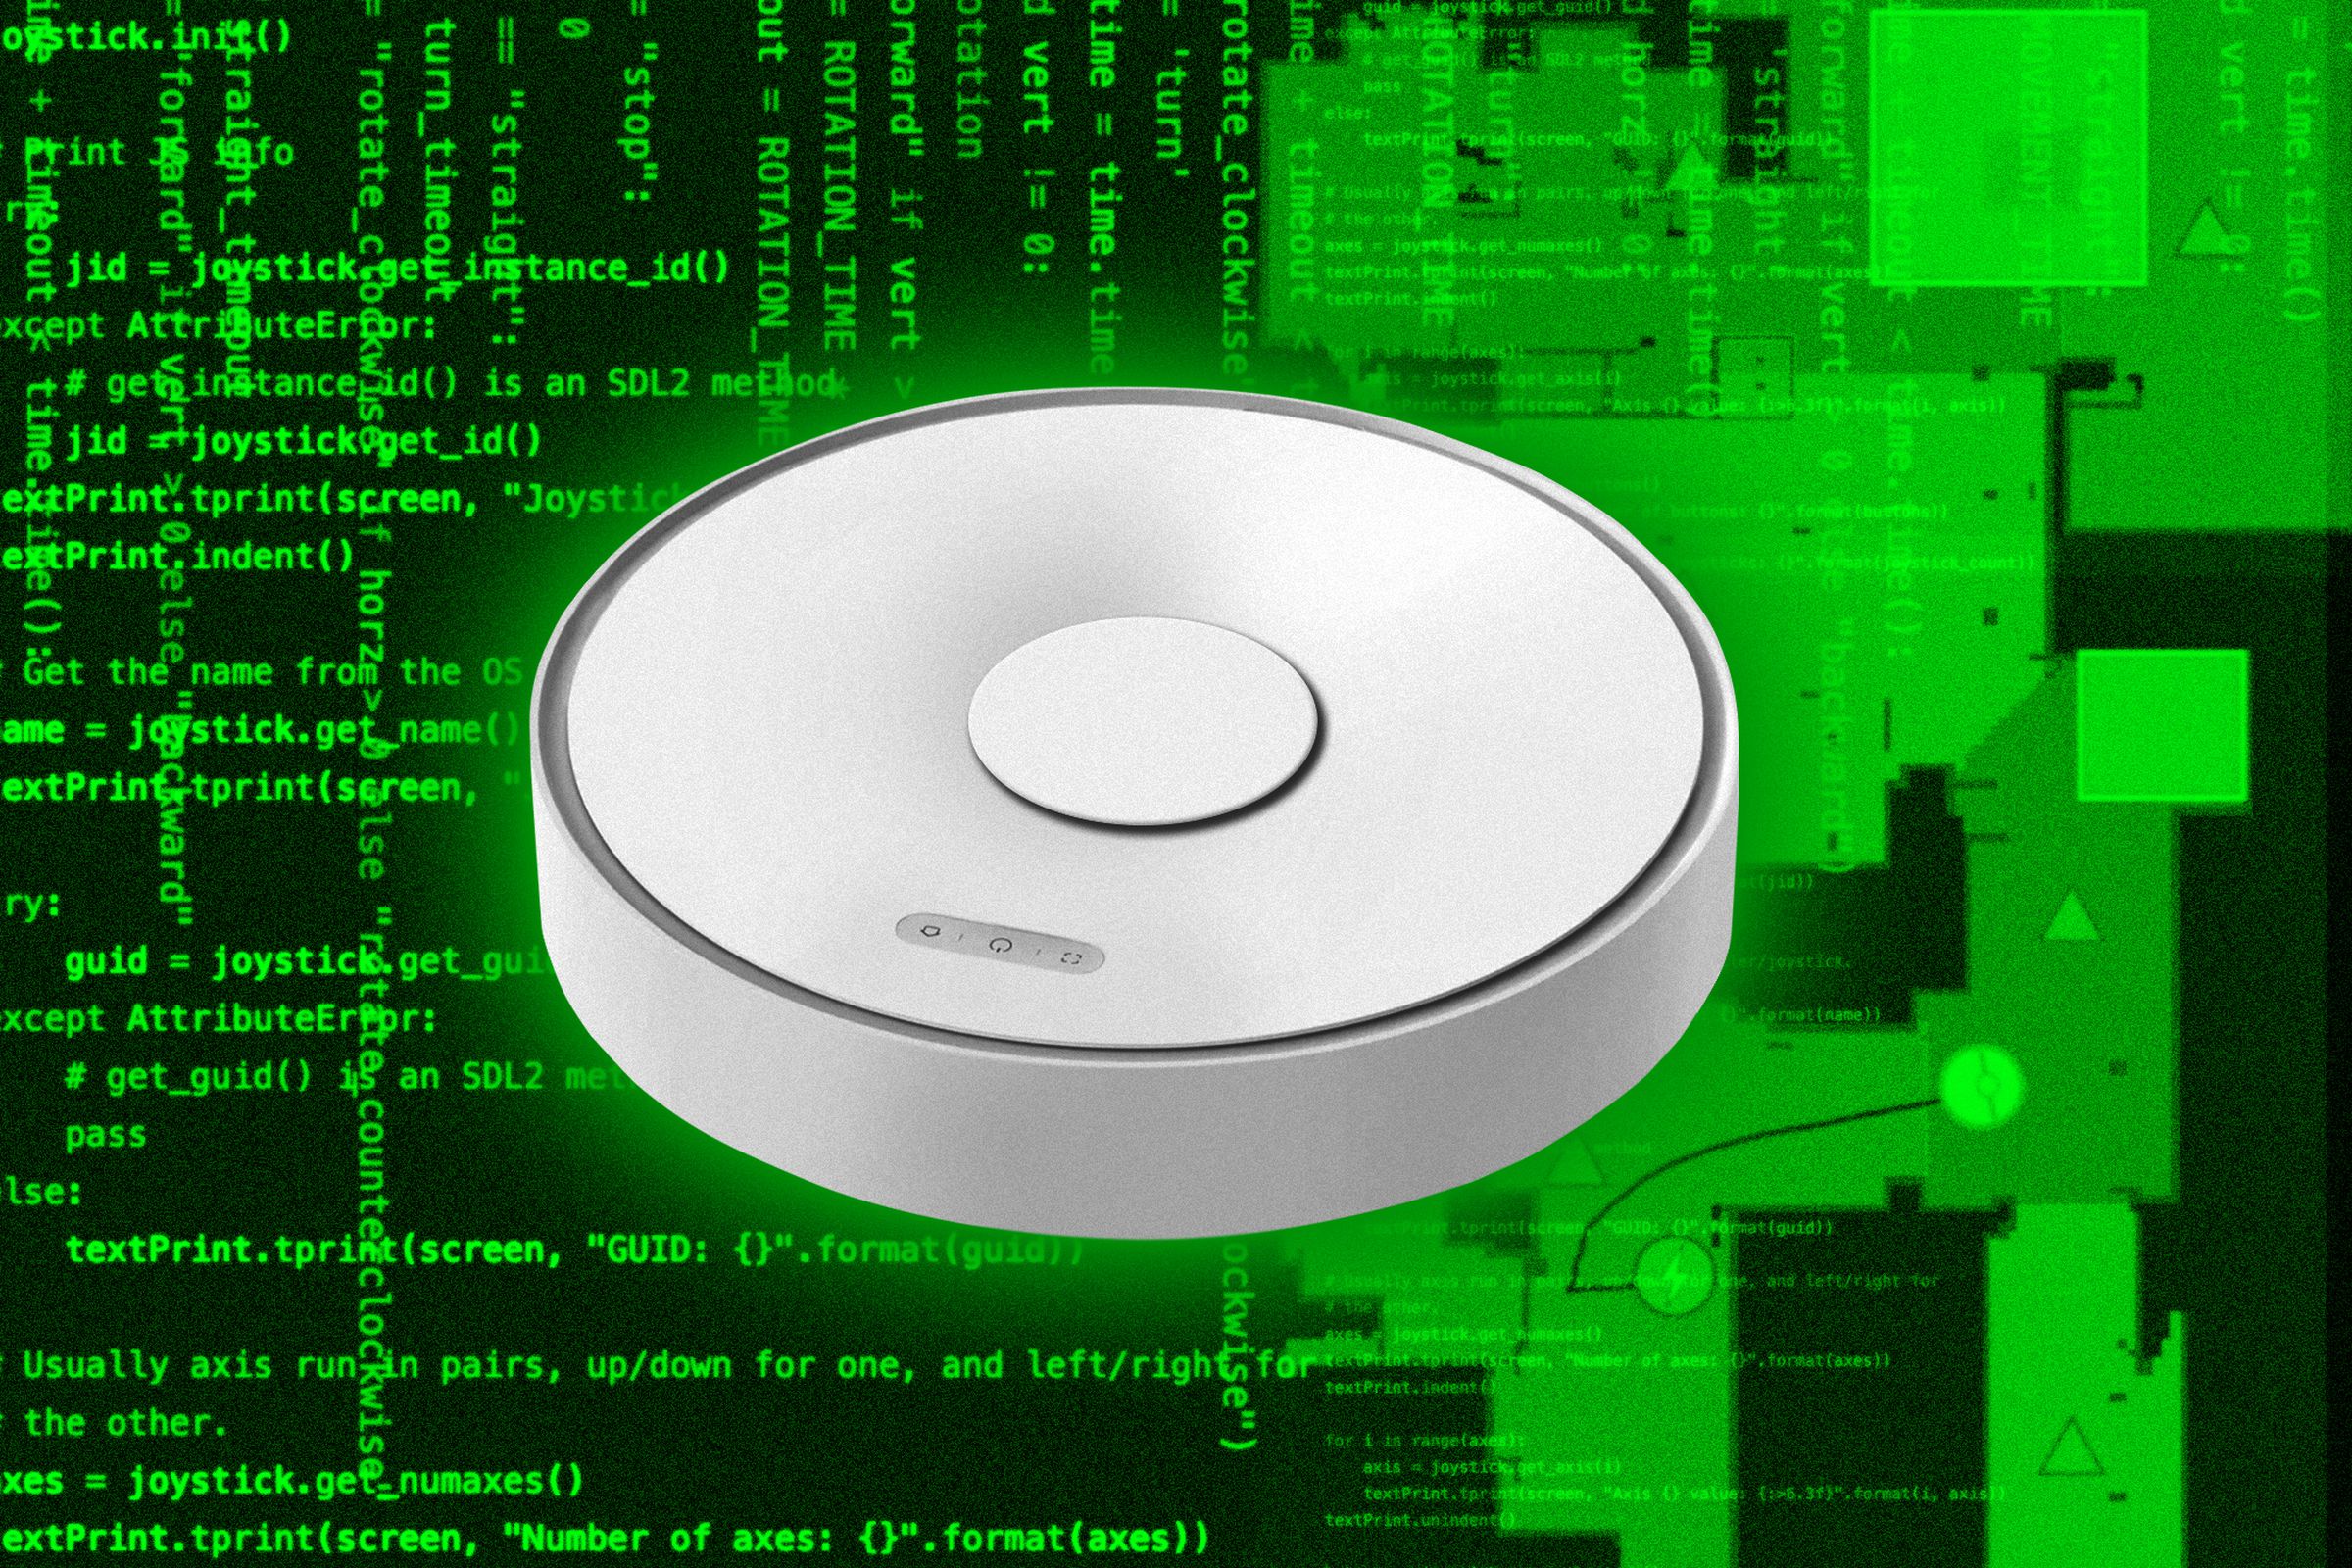 Photo illustration of a robot vacuum with hacker imagery in the background.